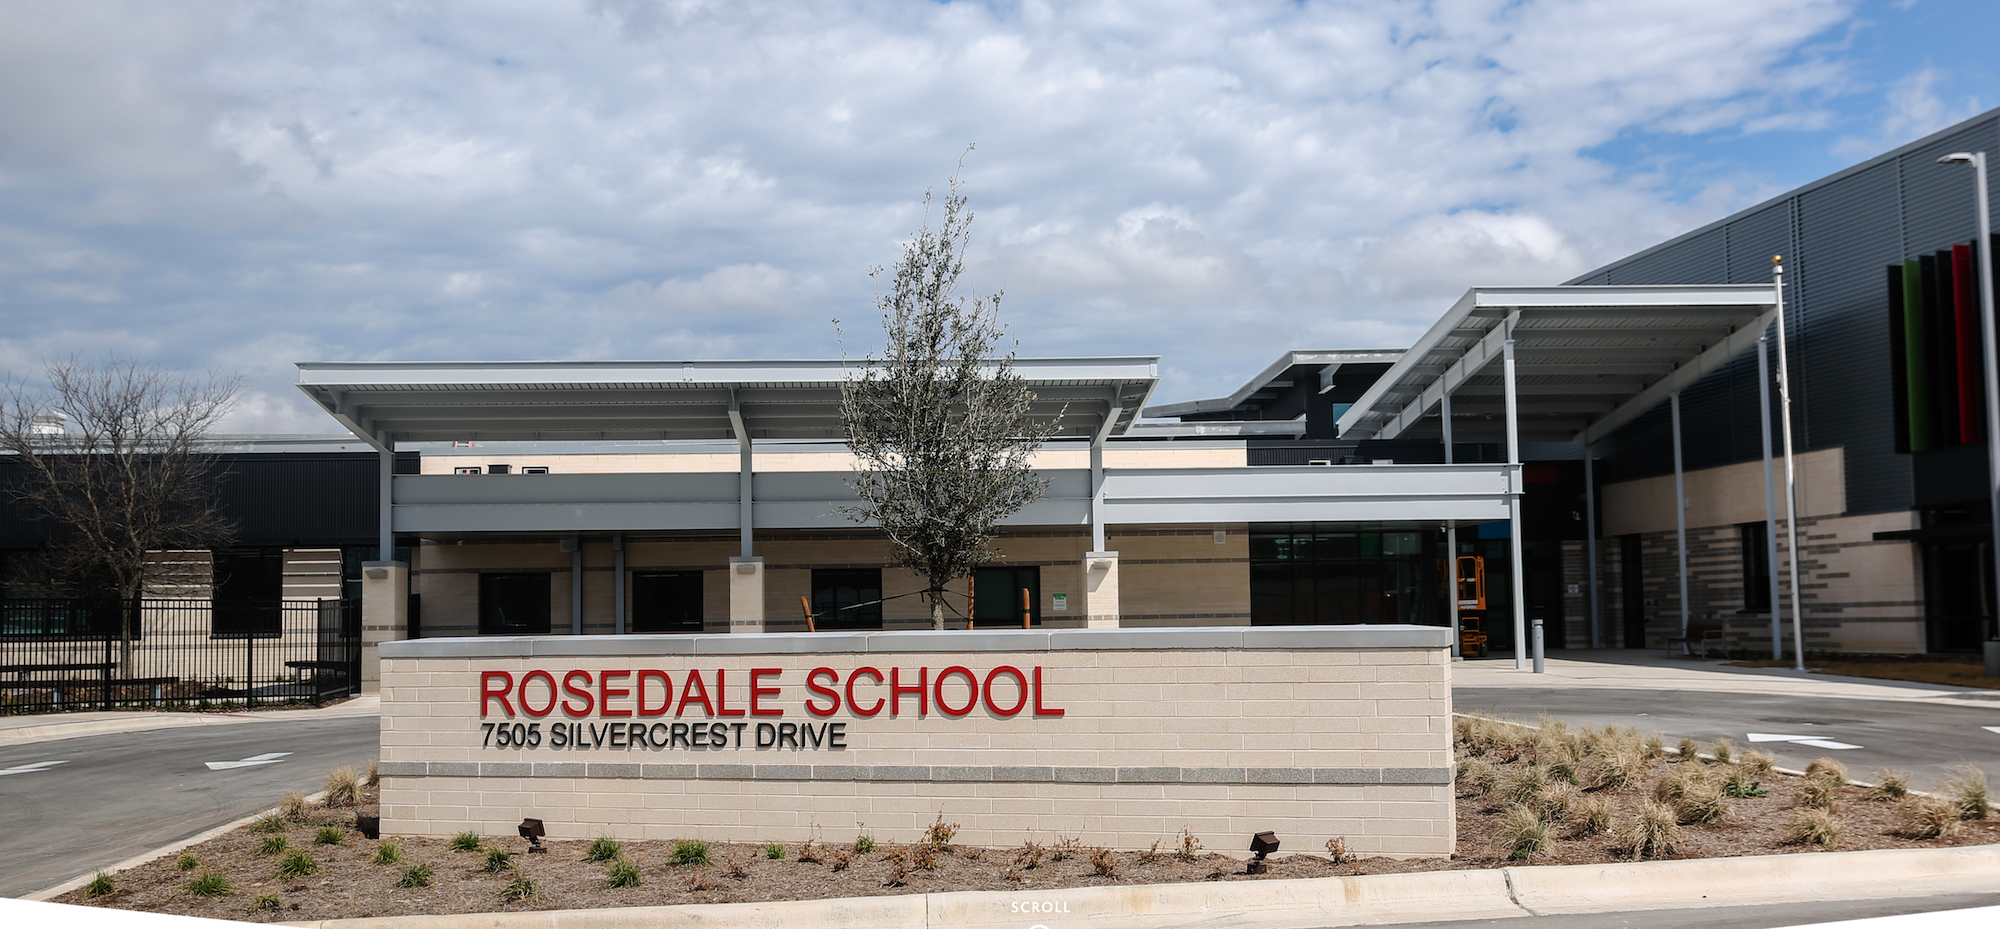 Austin’s new Rosedale School serves students with special needs aged 3 to 22